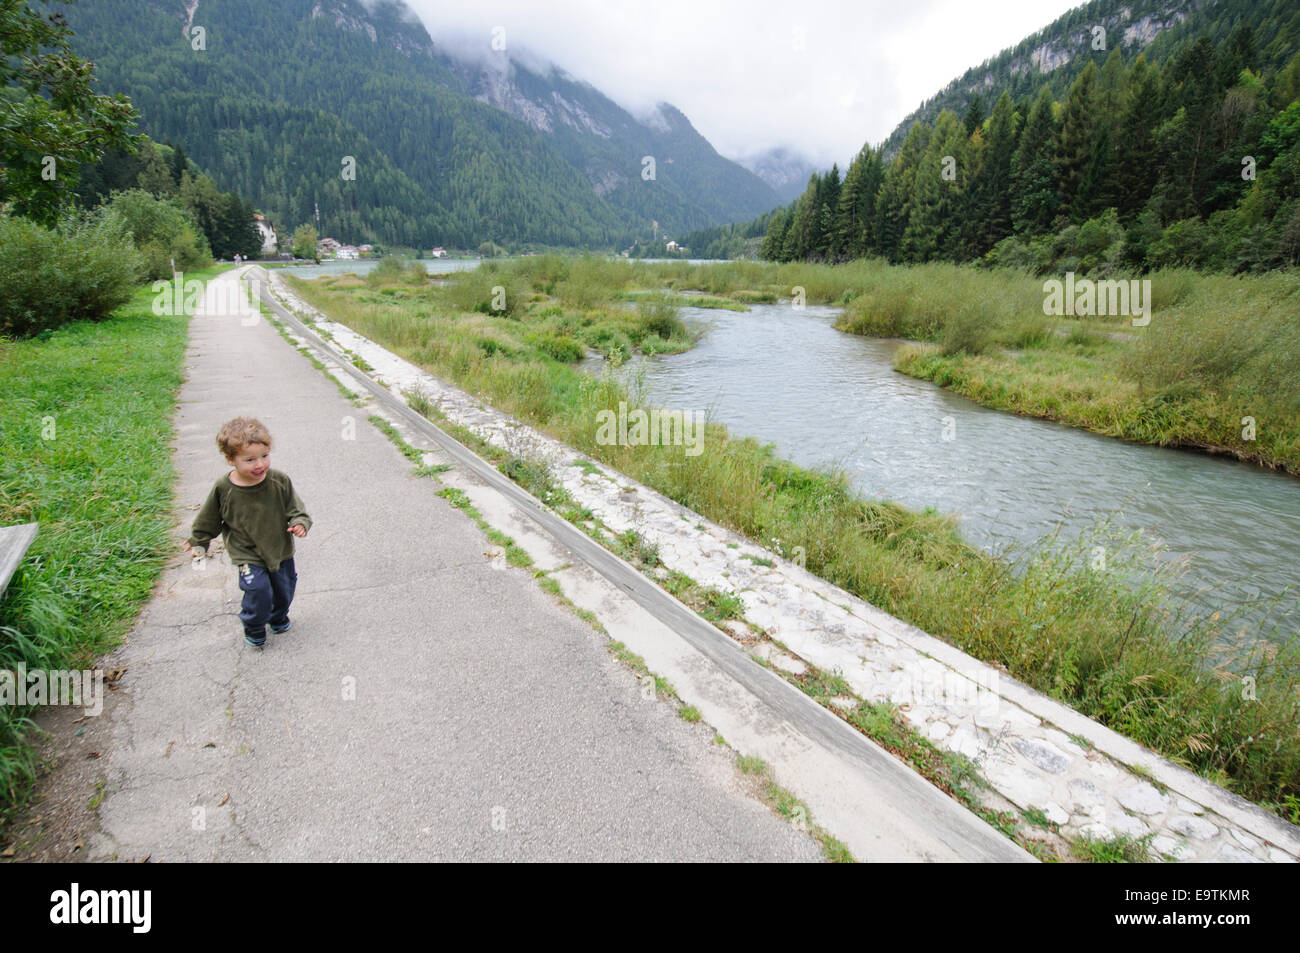 A young toddler walking along a stream. Photographed in Italy, Dolomites Mountains Stock Photo